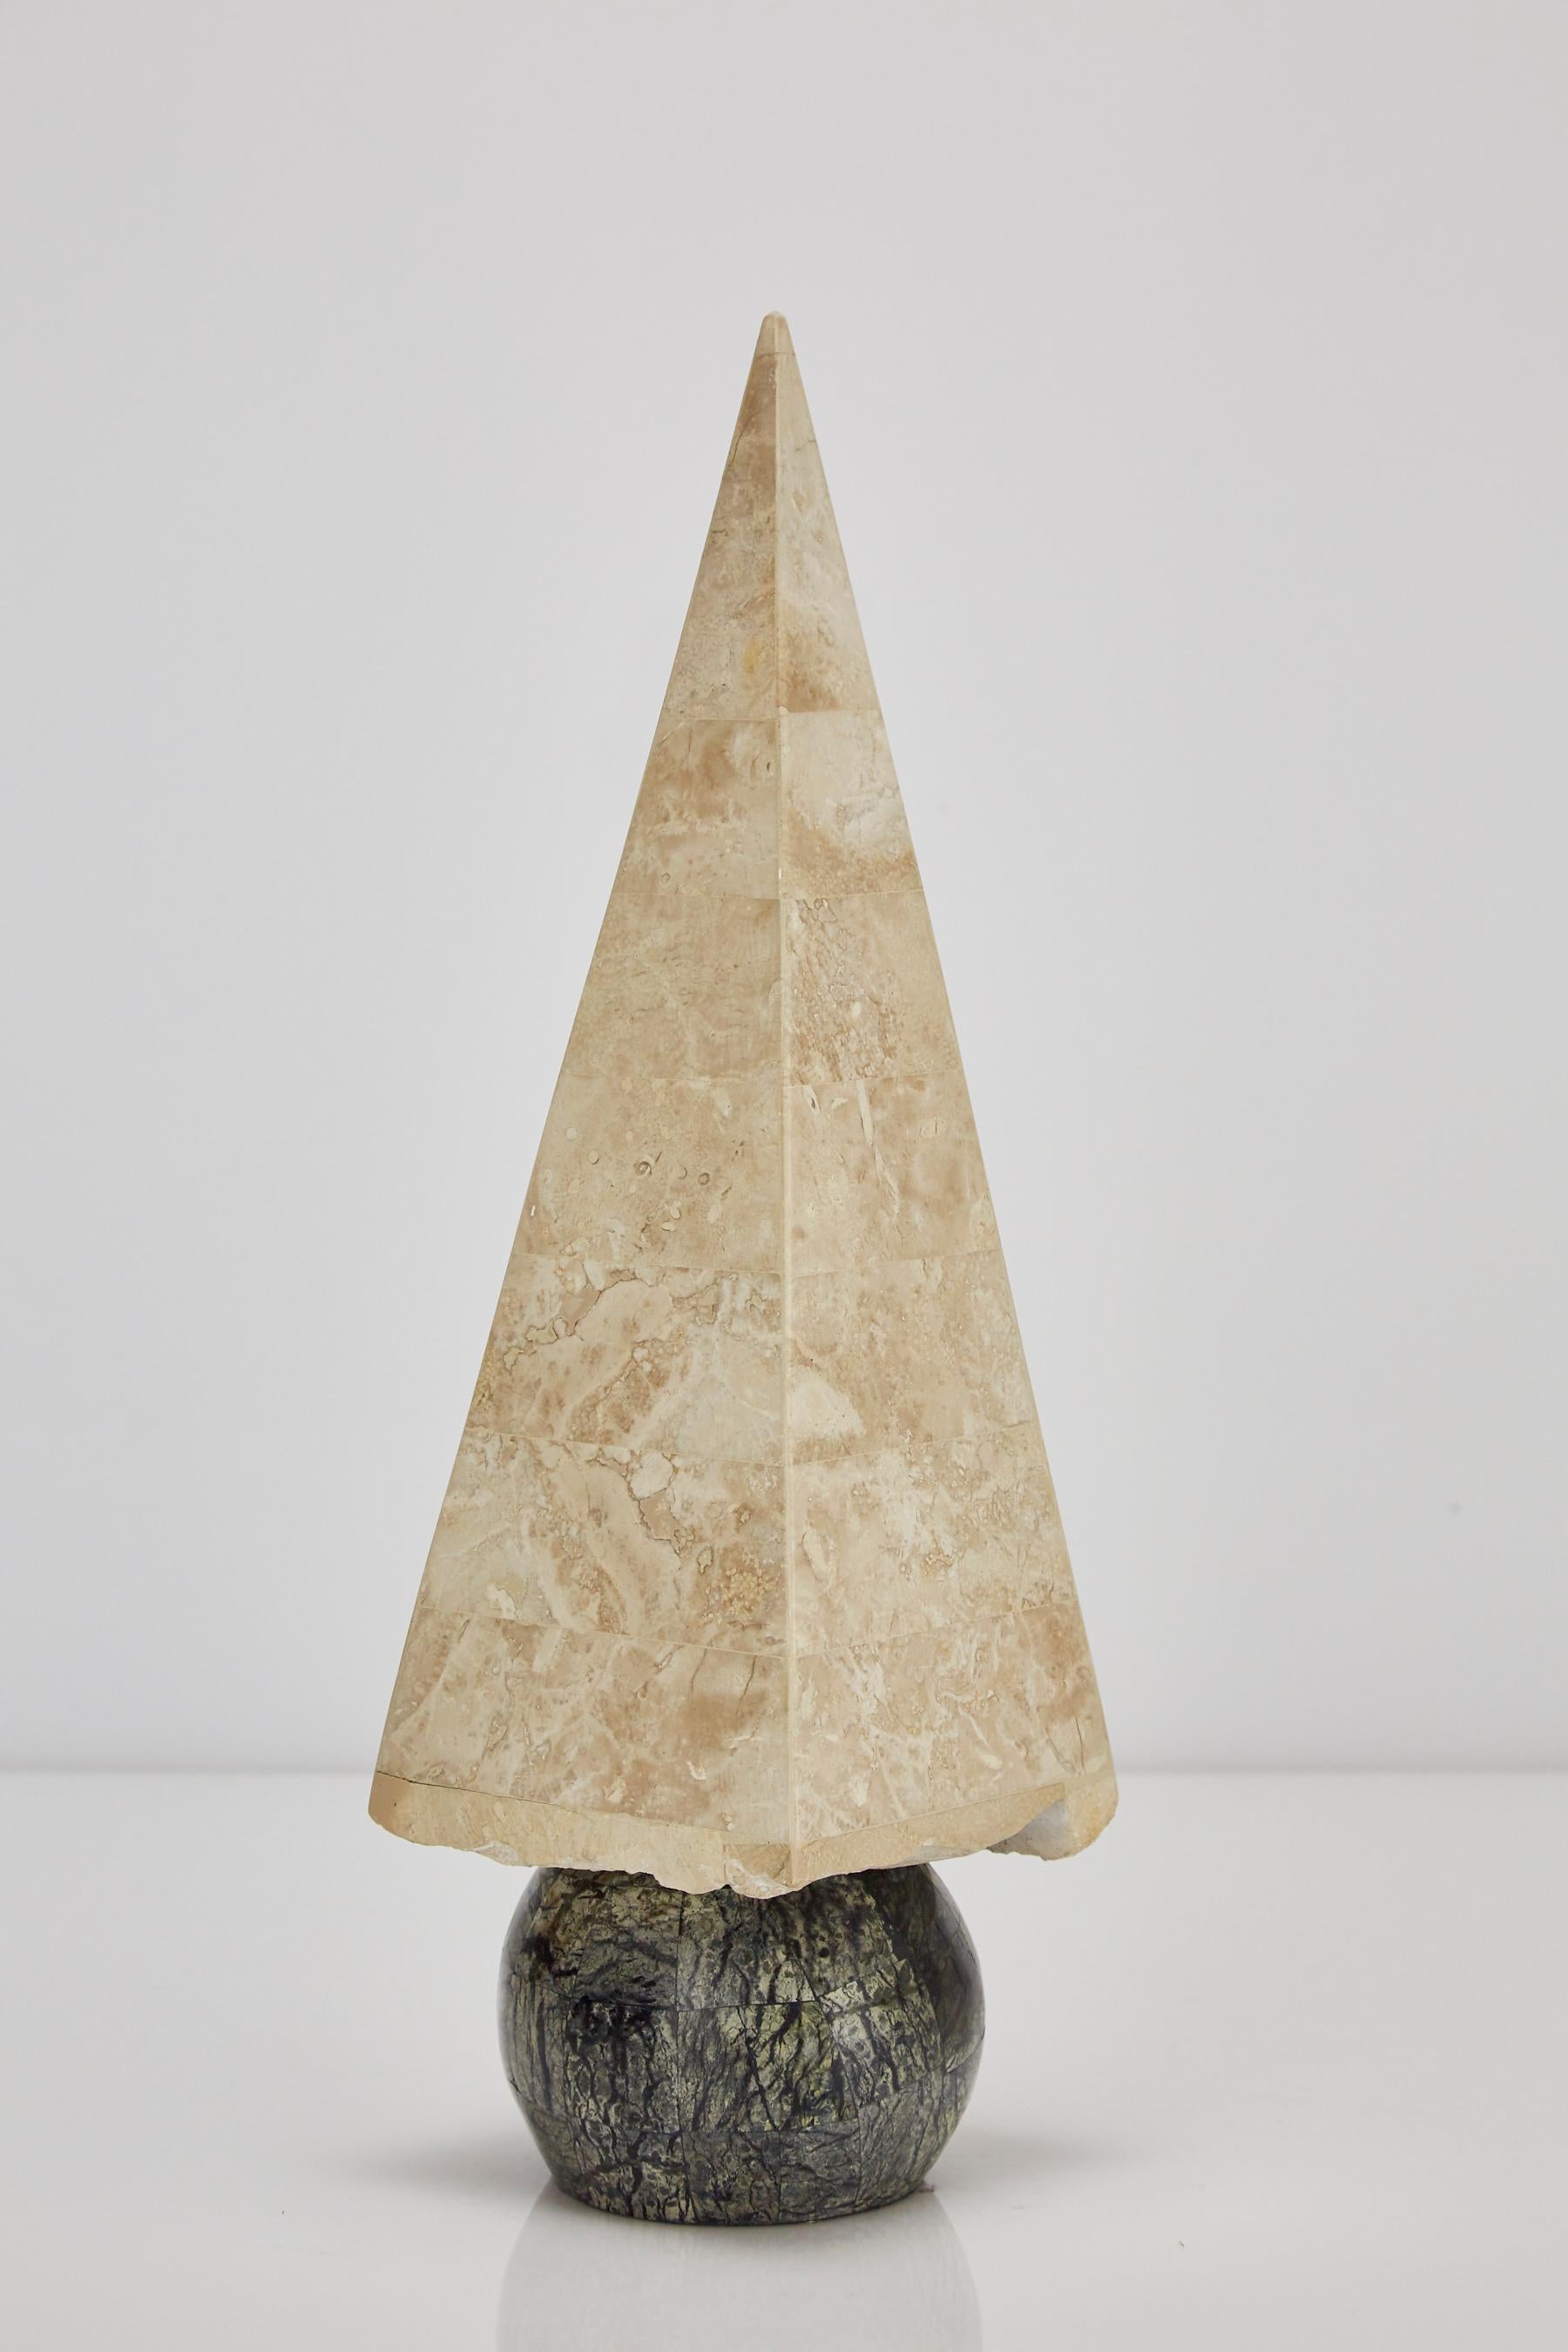 Philippine 20 in. Tall Tessellated Stone Obelisk, 1990s For Sale